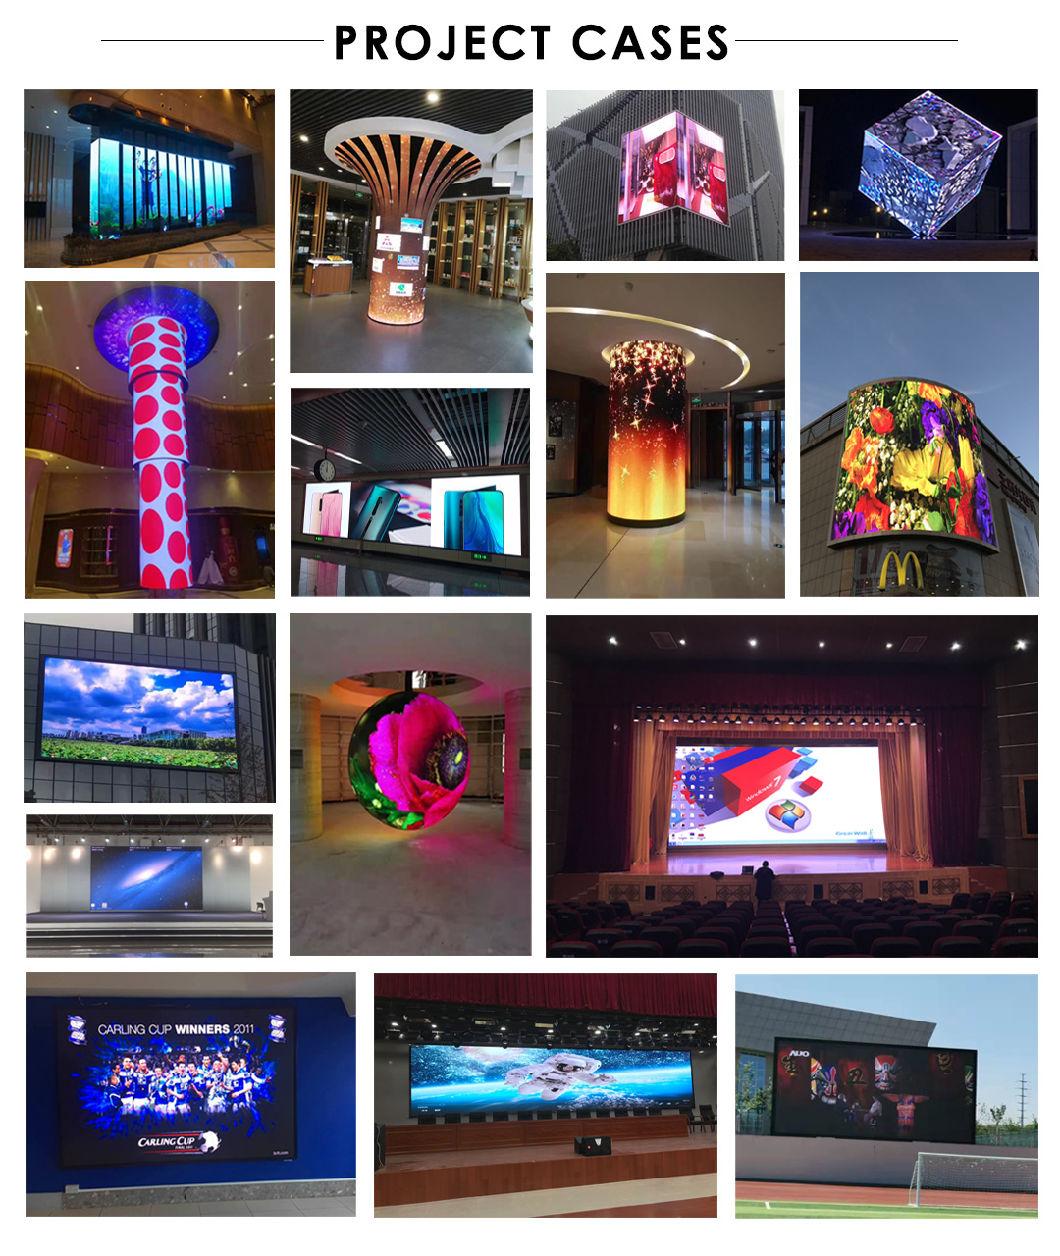 Waterproof Rental P3.91 P4.81 Giant Stage LED Video Wall Panel Screen for Concert